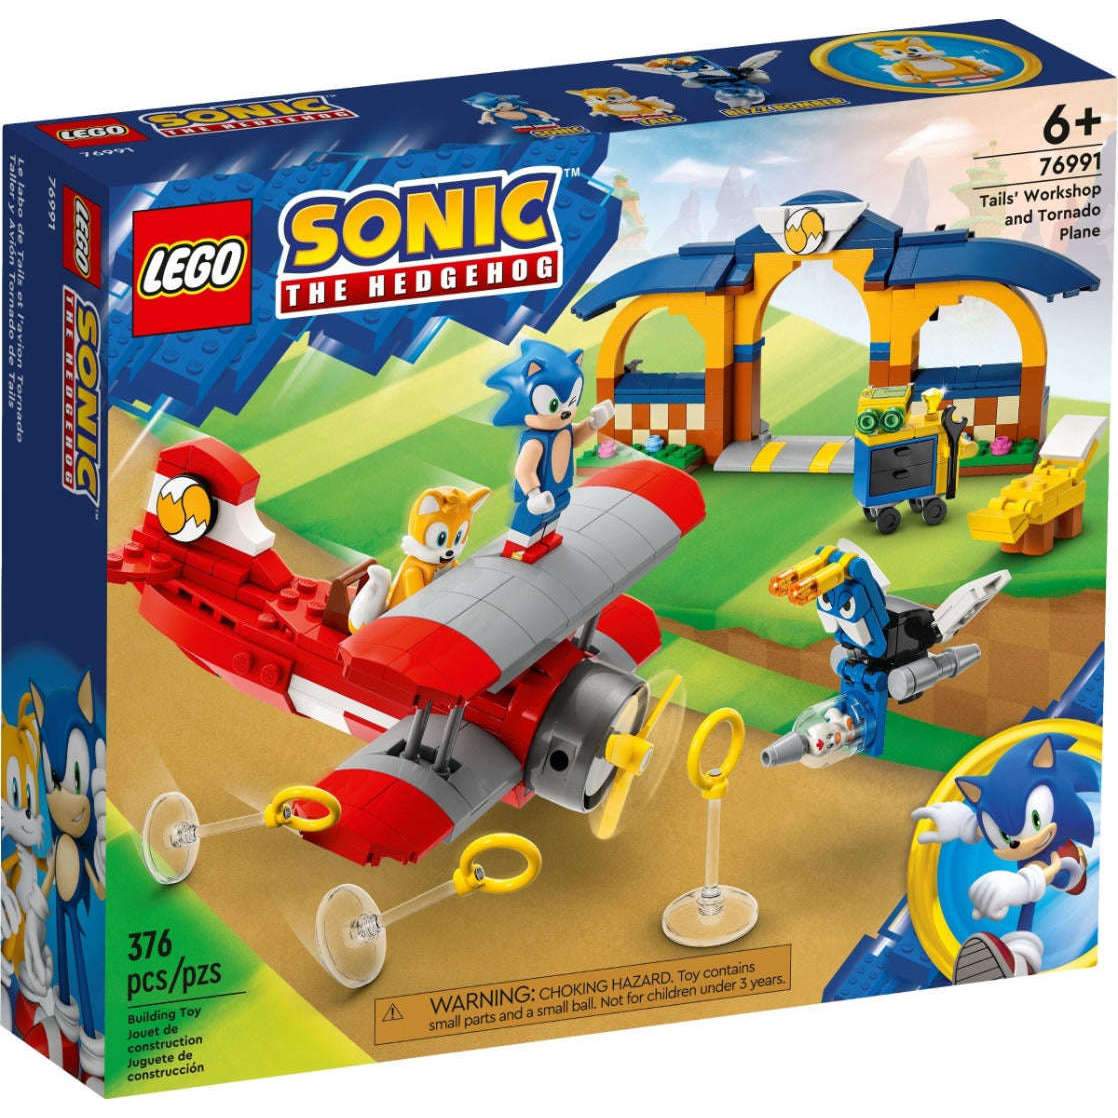 Toys N Tuck:Lego 76991 Sonic The Hedgehog Tails' Workshop and Tornado Plane,Lego Sonic The Hedgehog